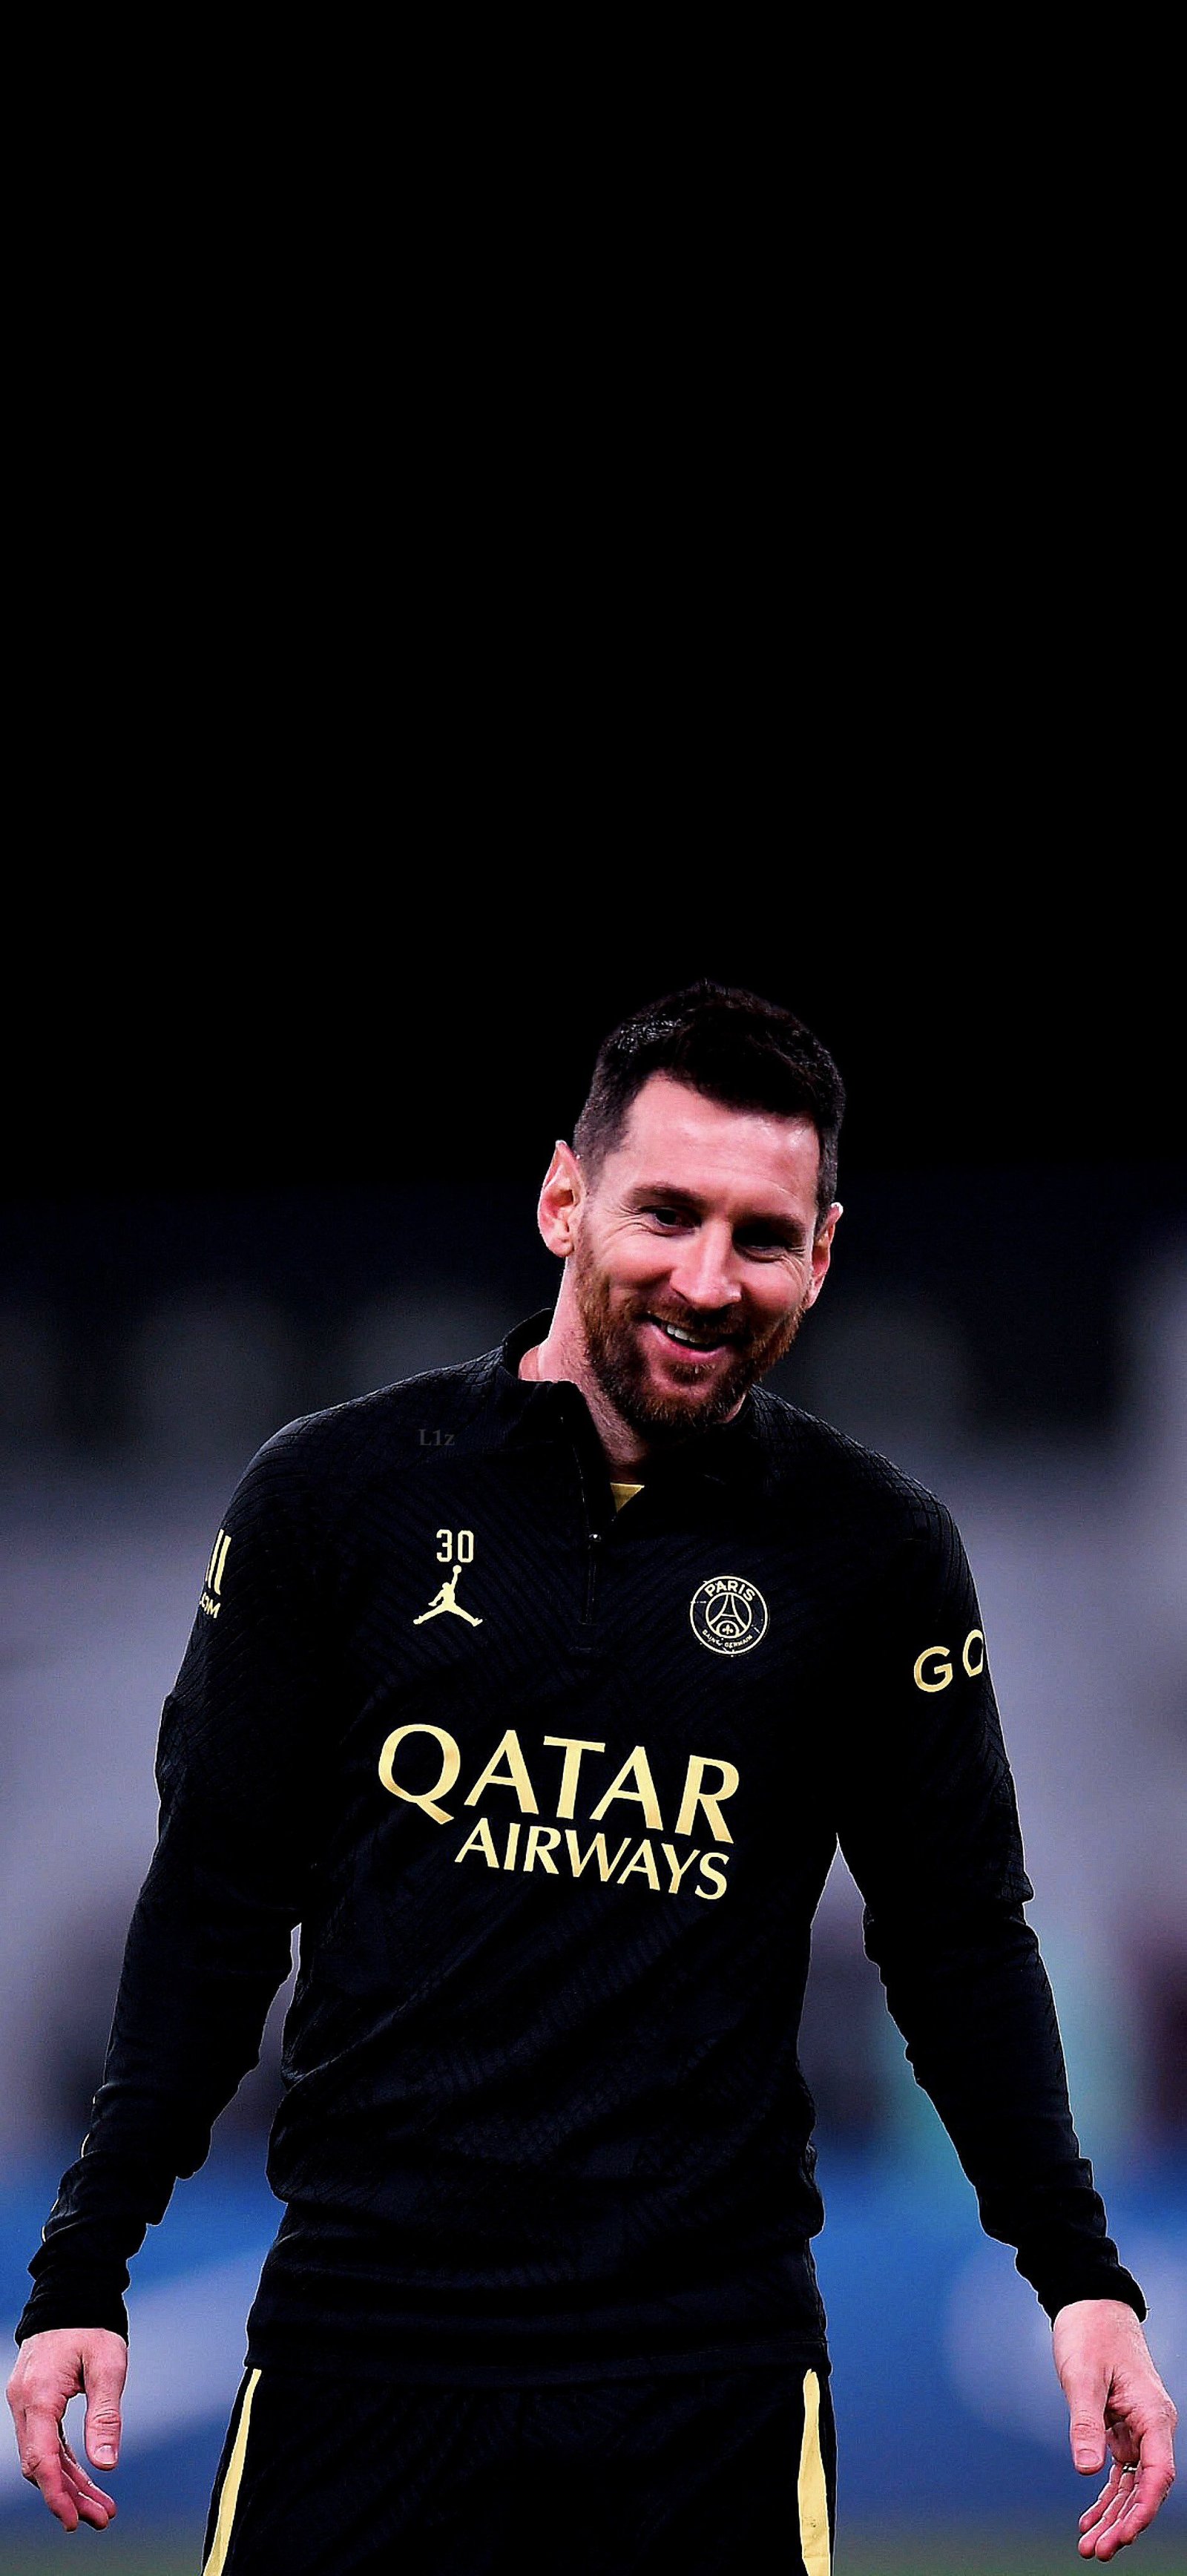 Messi HD Wallpaper For Tablet